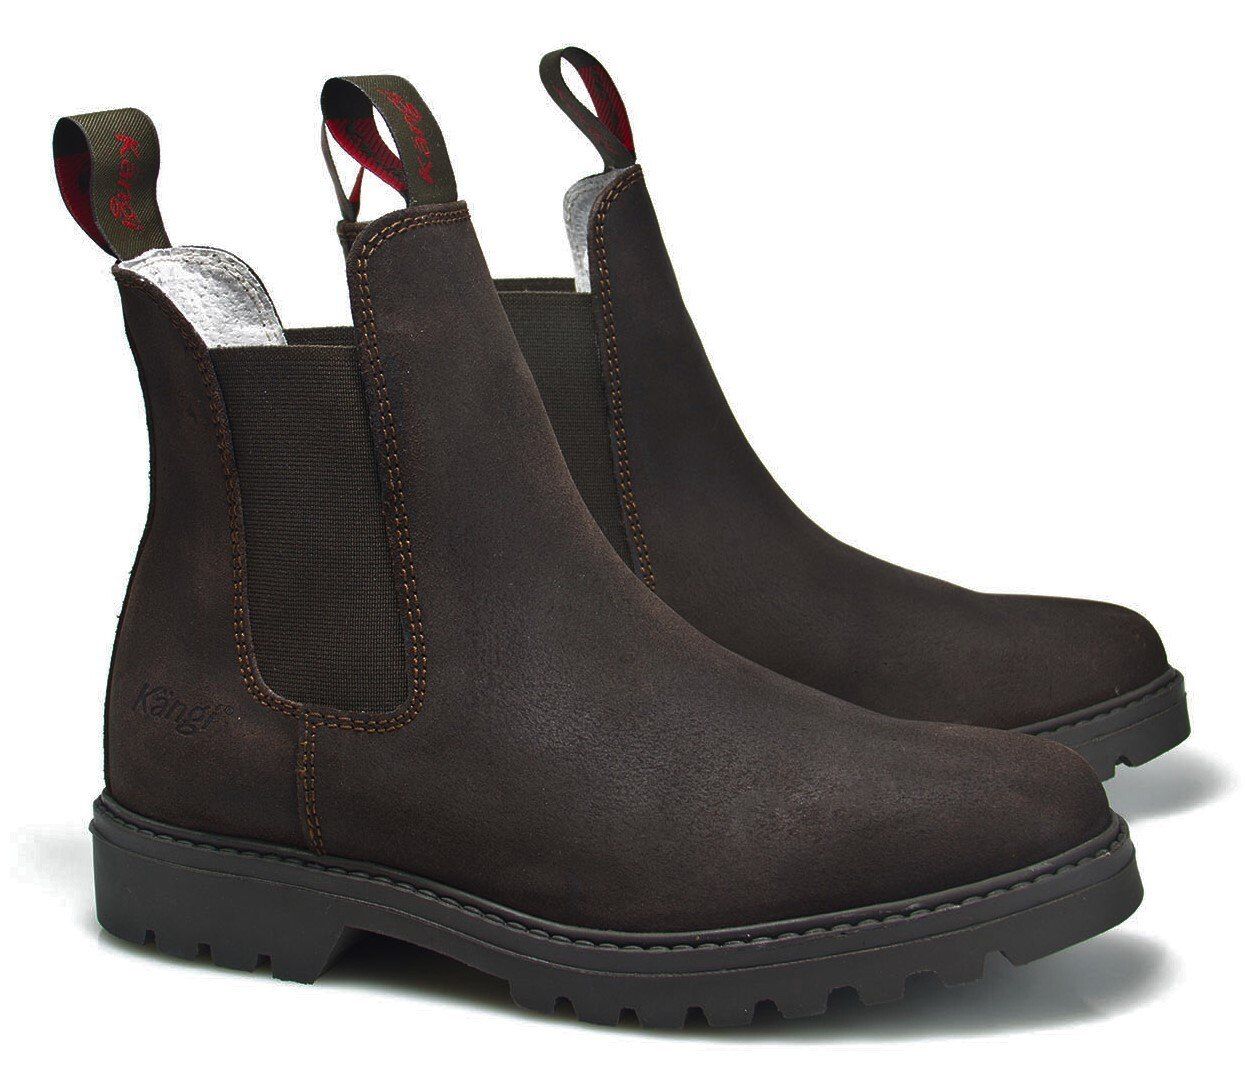 Hobo Boots for Kids